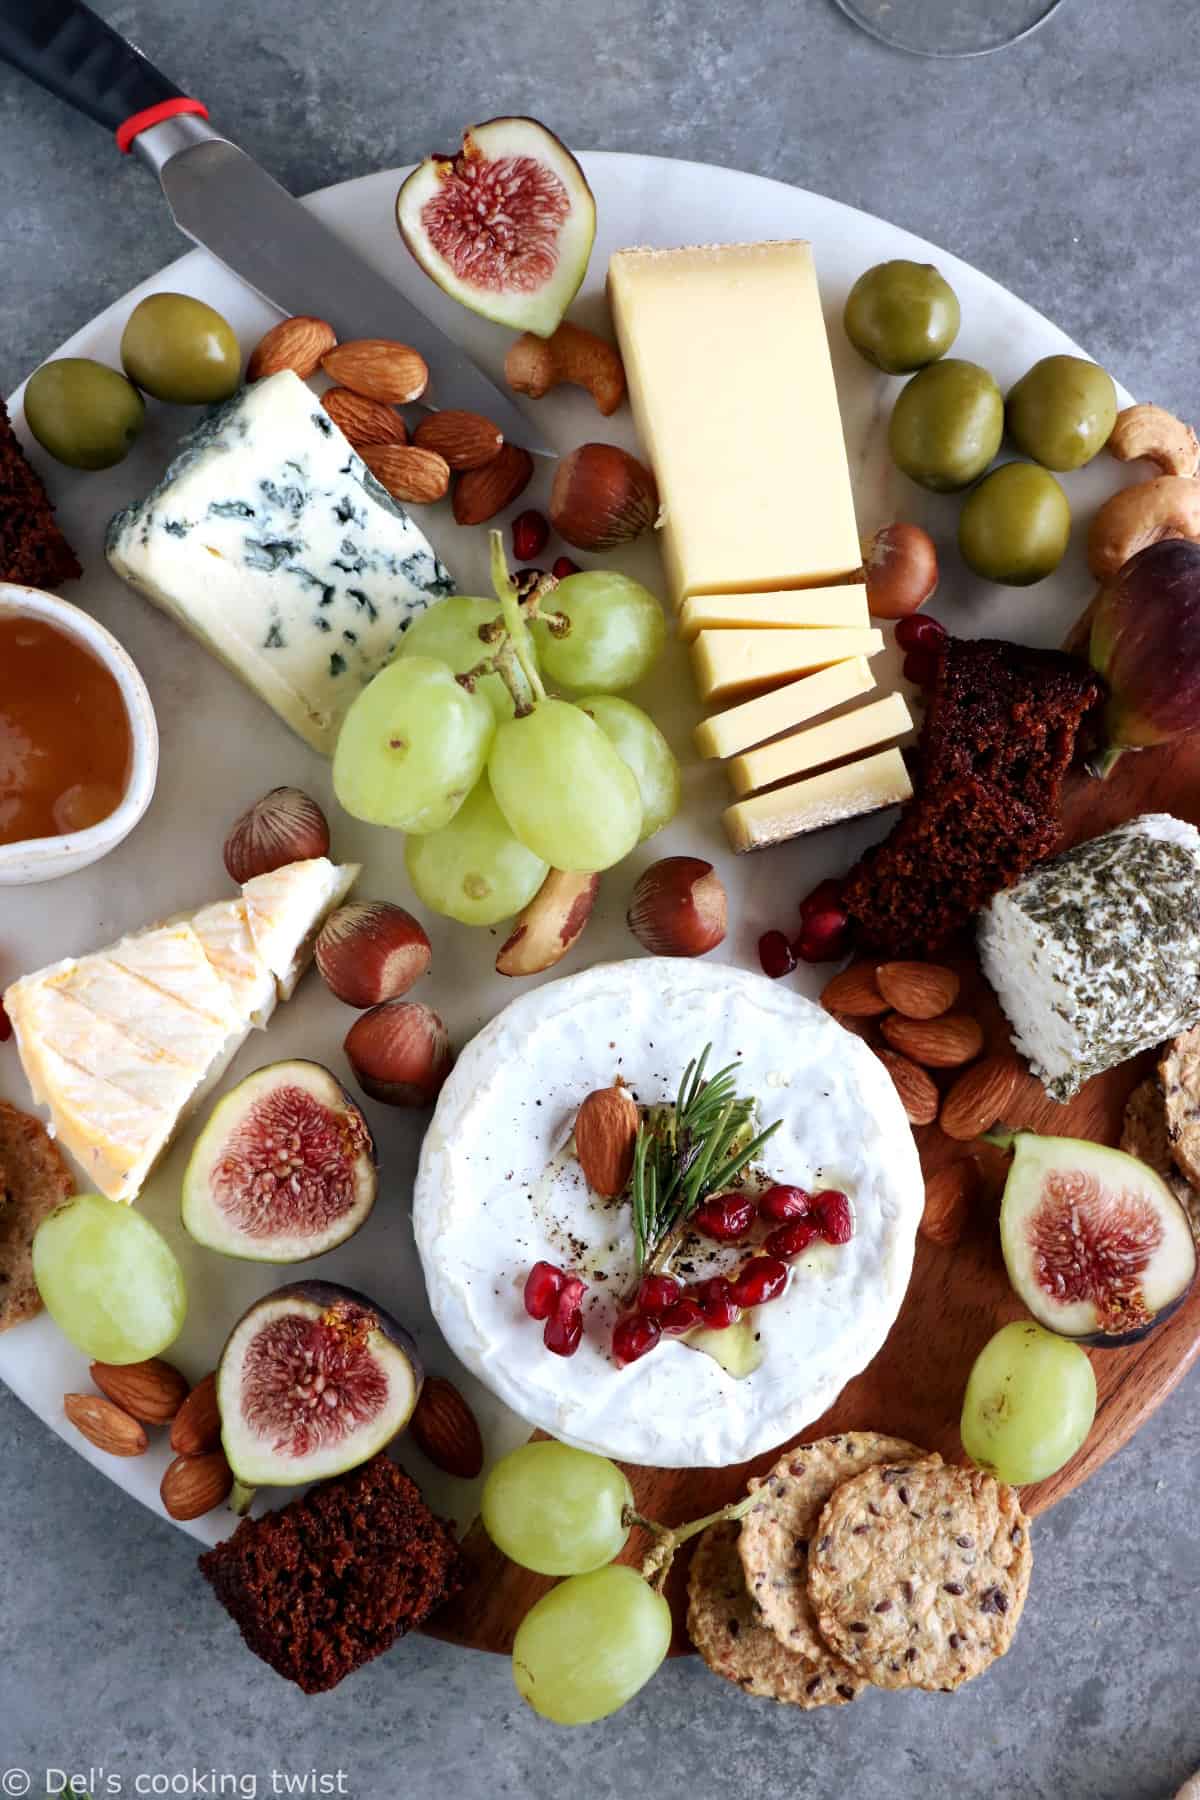 Here's a complete guide for how to make a perfect cheese board (vegetarian) with step-by-step photos to guide you.